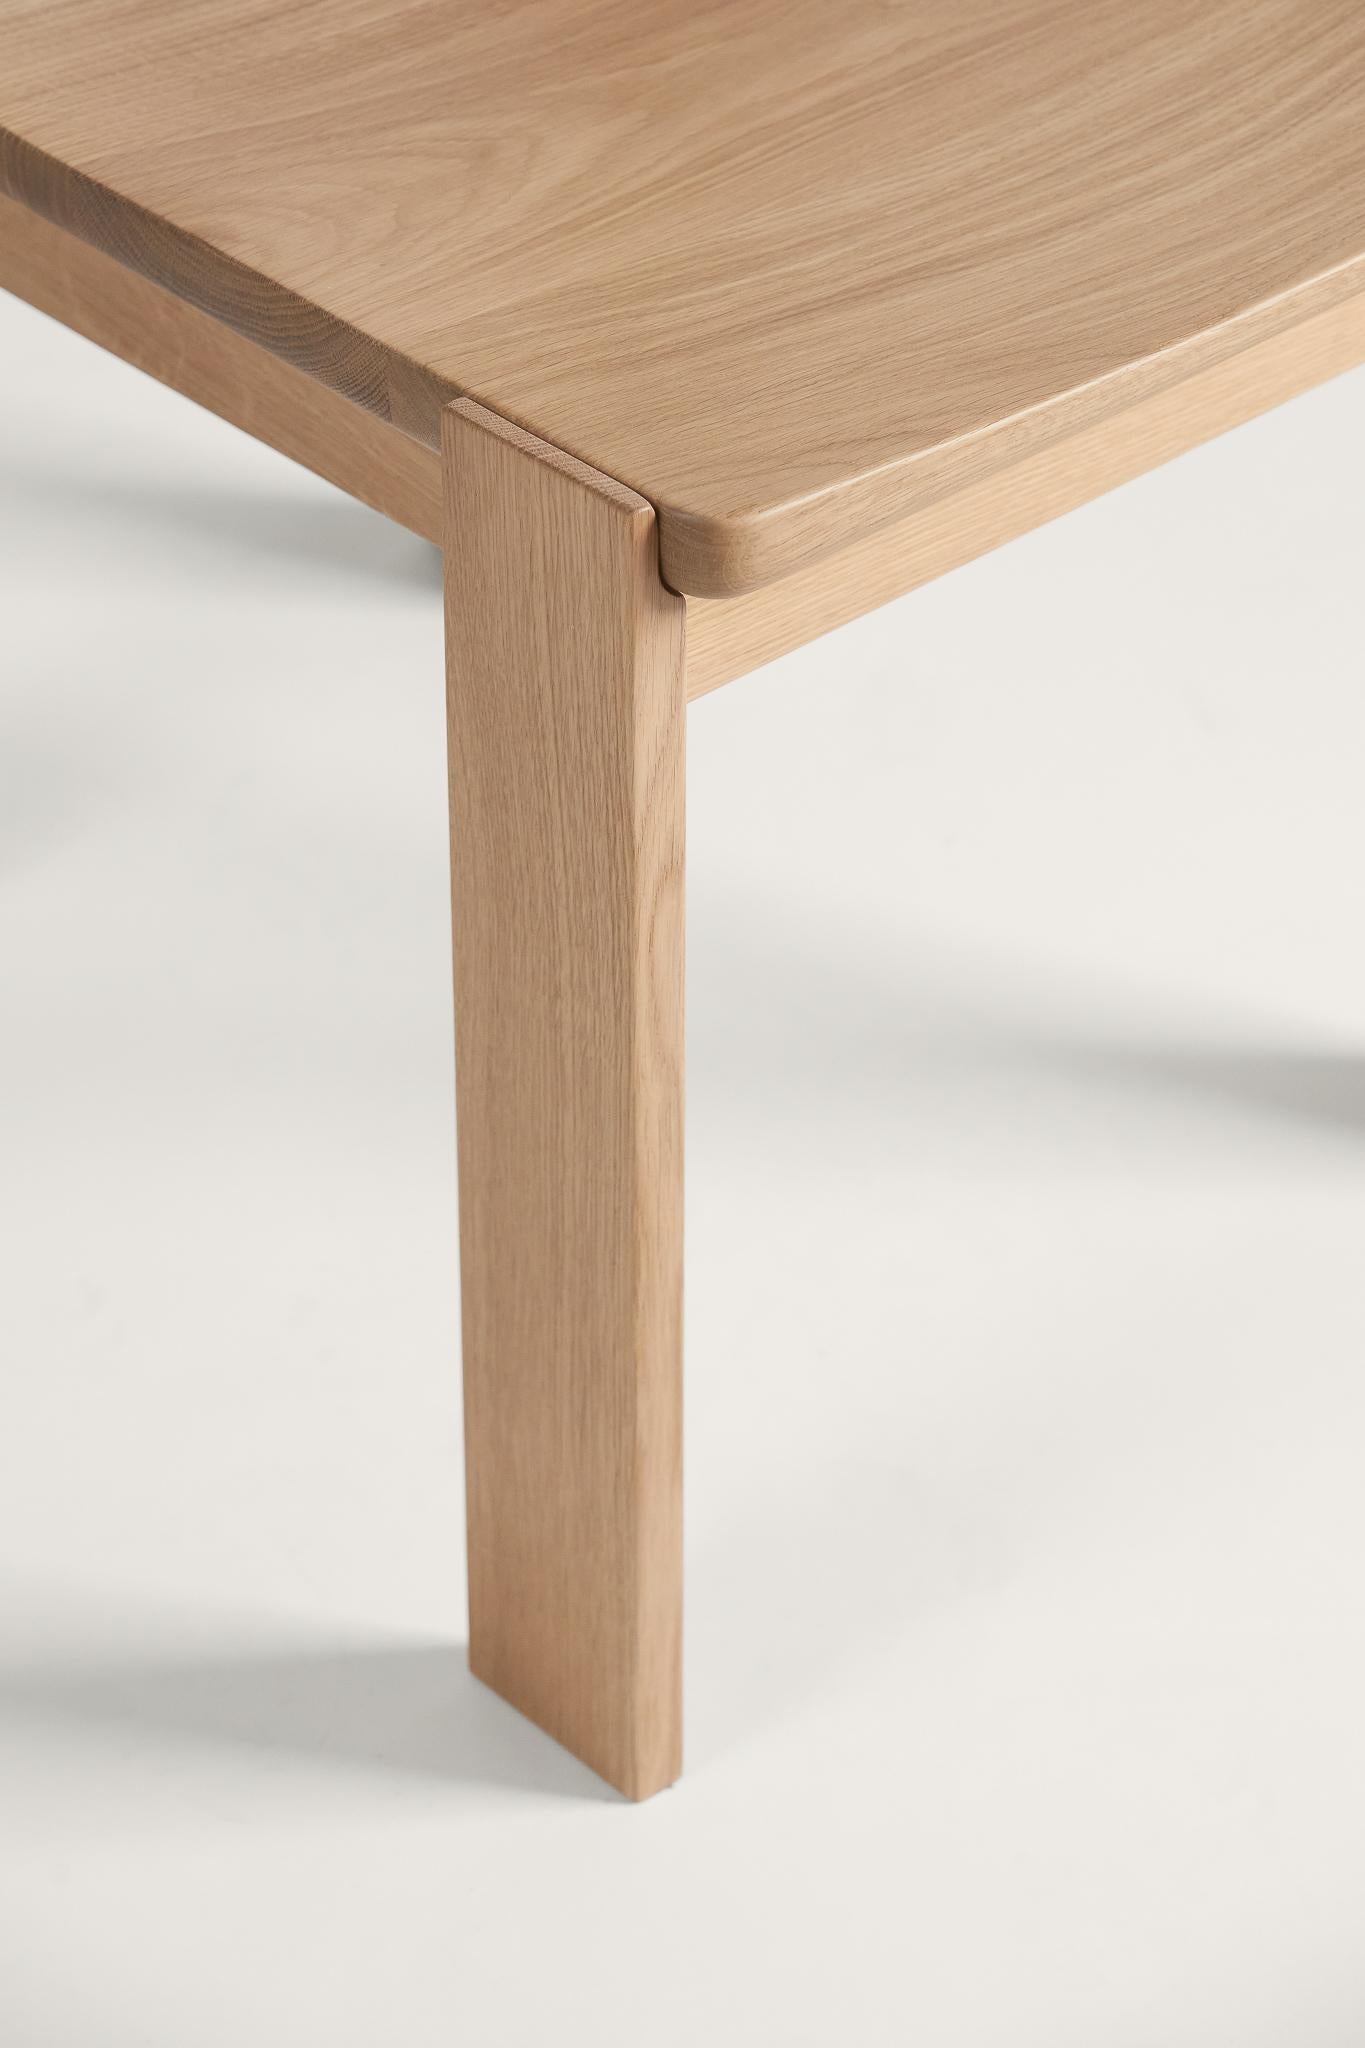 Oak Pasco Chair by Arbore x Studio PHAT For Sale